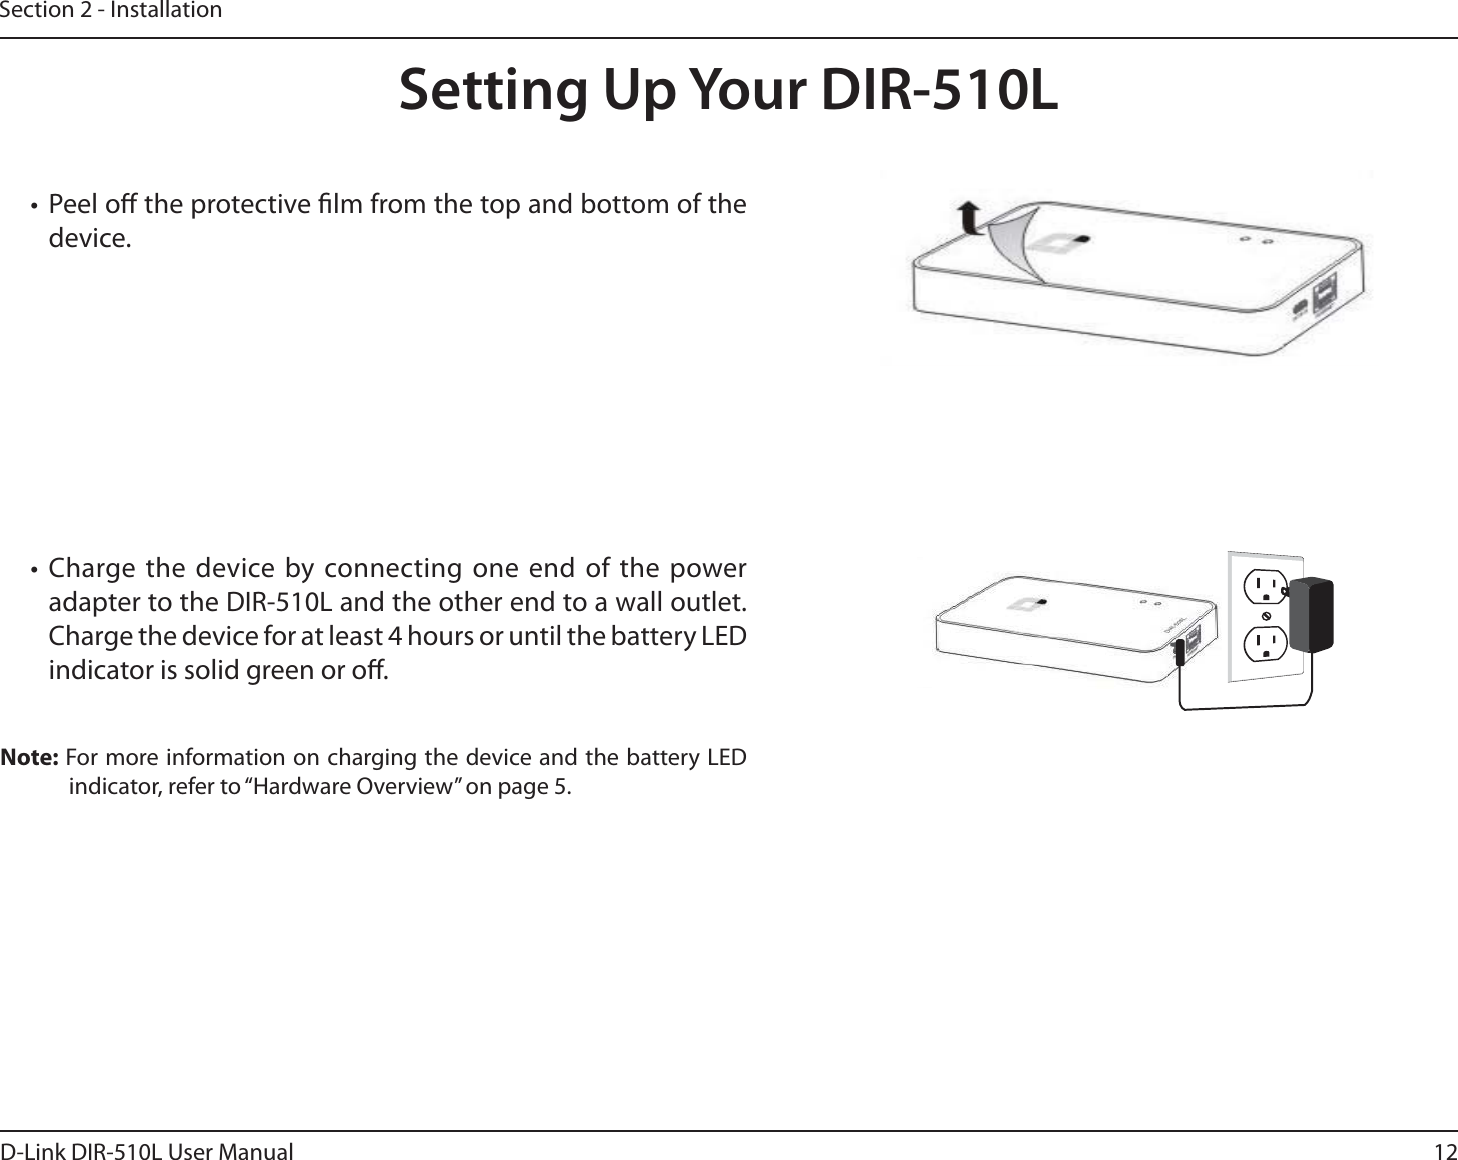 12D-Link DIR-510L User ManualSection 2 - InstallationSetting Up Your DIR-510Lt Peel o the protective lm from the top and bottom of the device.t Charge the device by connecting one end of the power adapter to the DIR-510L and the other end to a wall outlet. Charge the device for at least 4 hours or until the battery LED indicator is solid green or o.Note: For more information on charging the device and the battery LED indicator, refer to “Hardware Overview” on page 5.